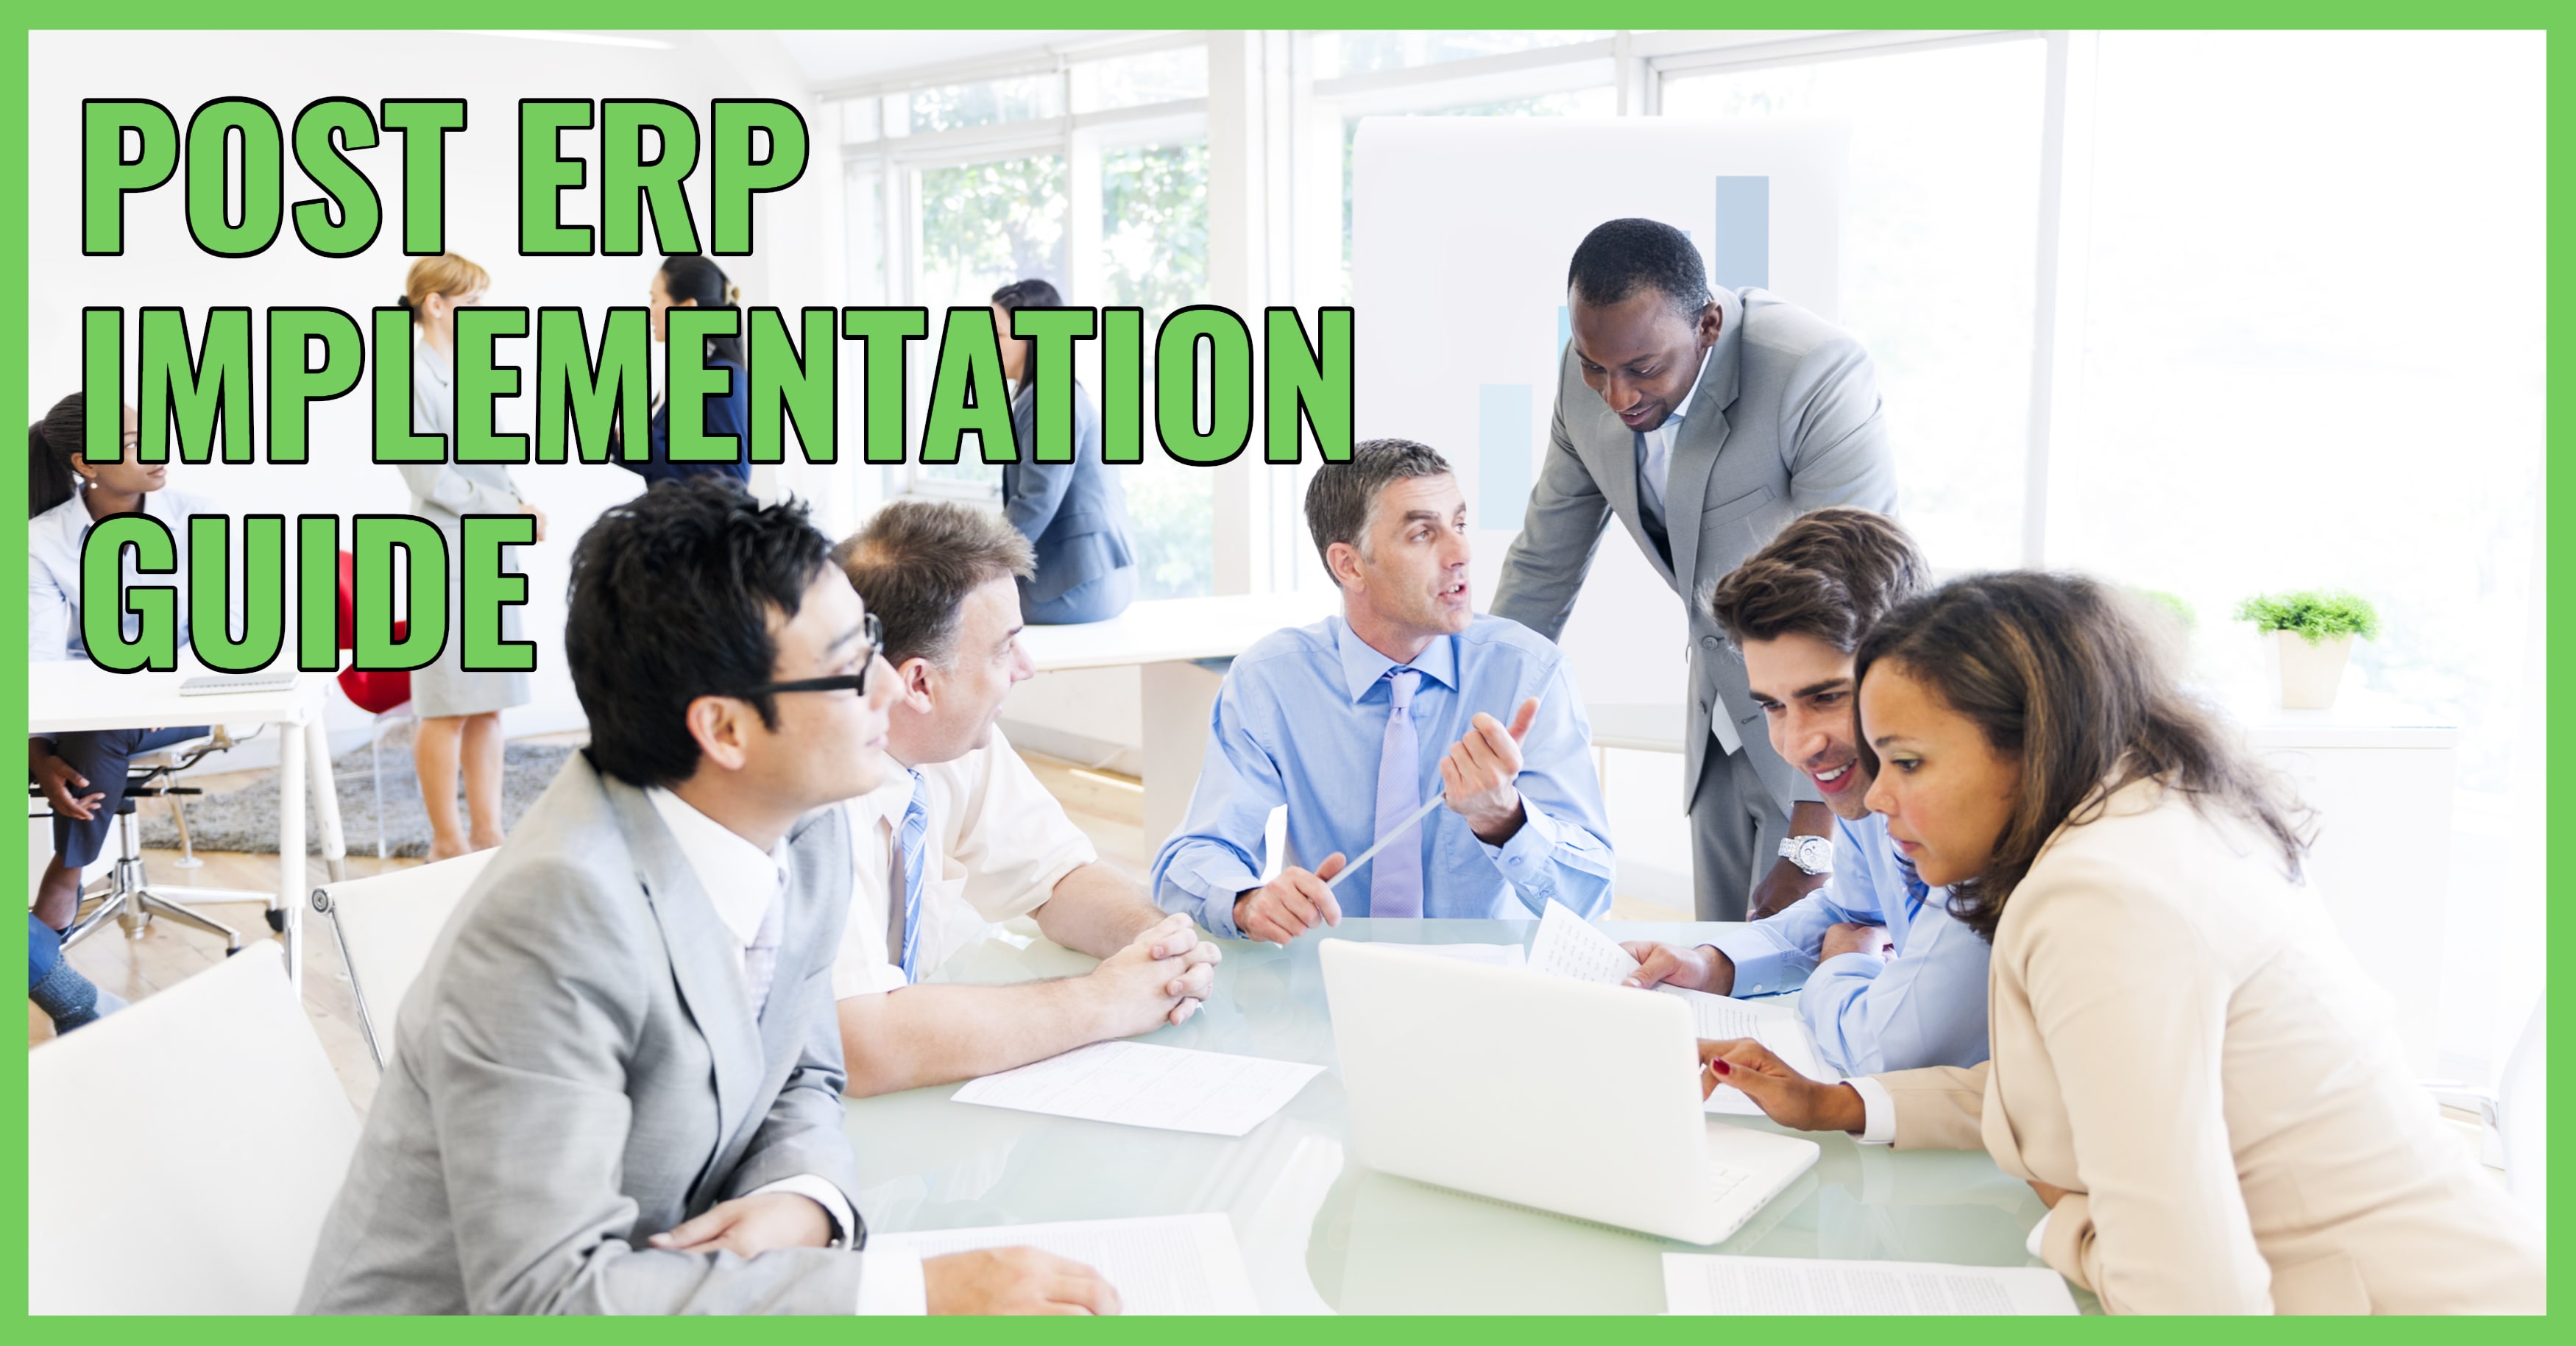 Post ERP Implementation Guide